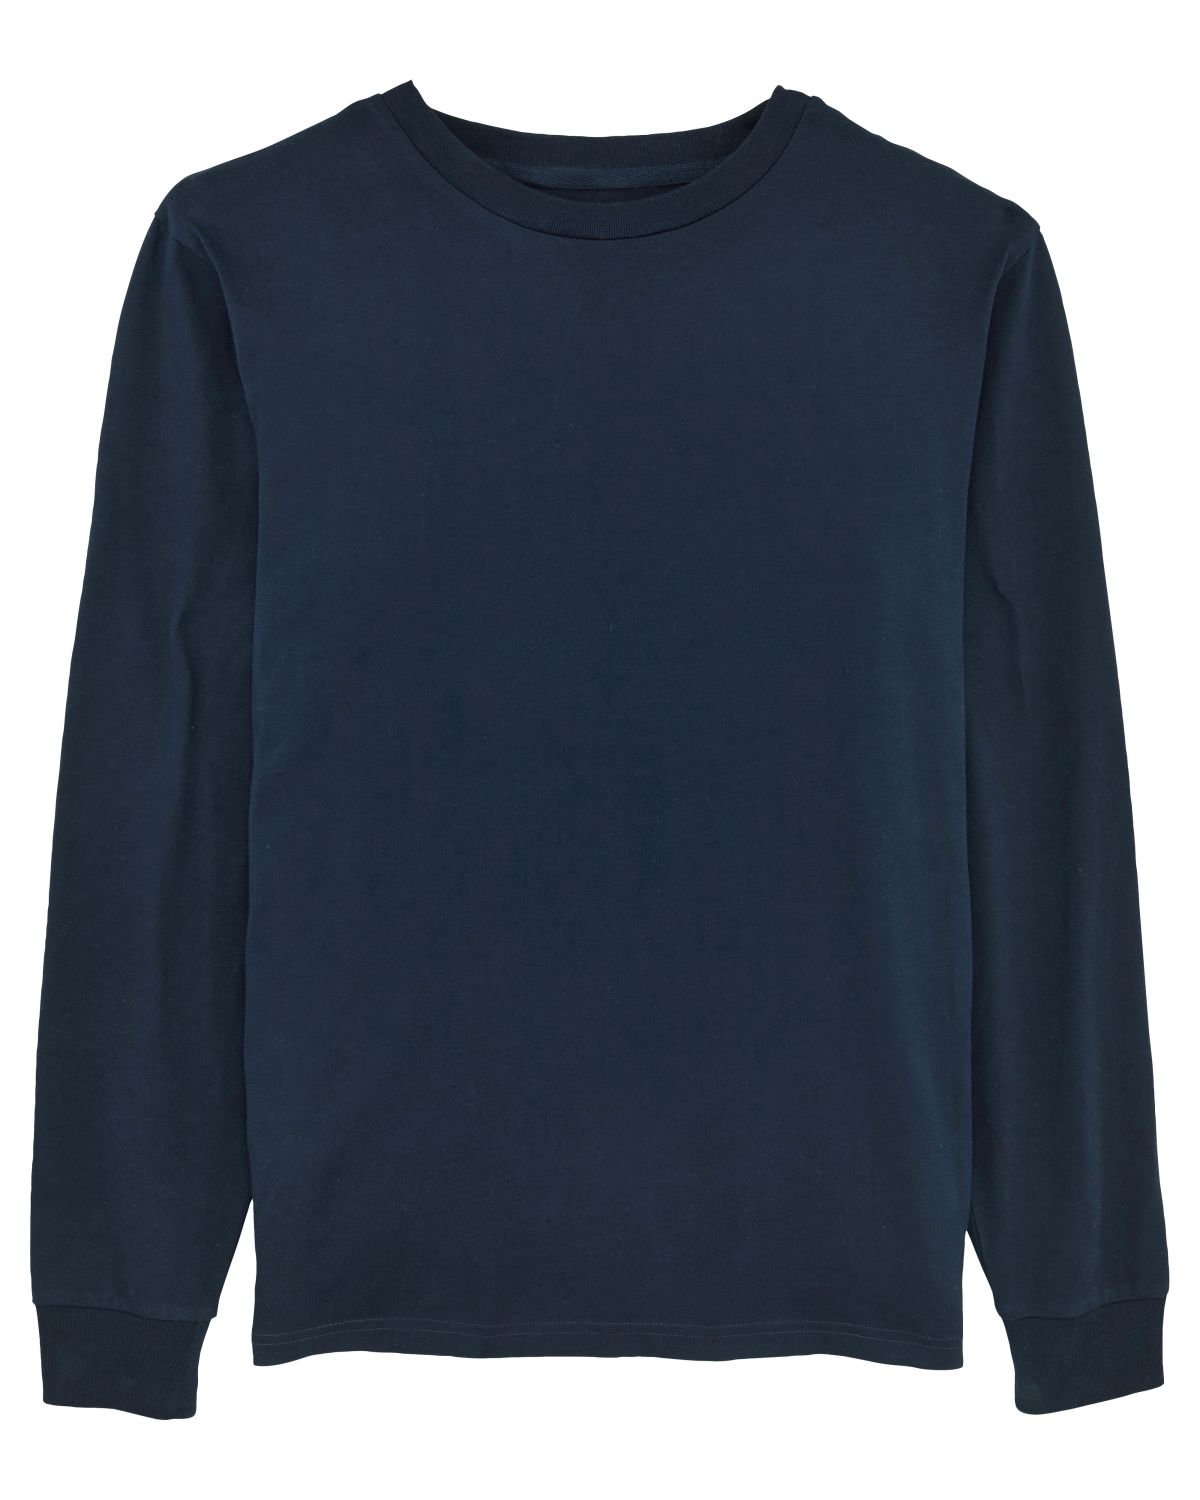 Customize your own sustainable long-sleeve t-shirt made of 100% GOTS-certified organic cottton